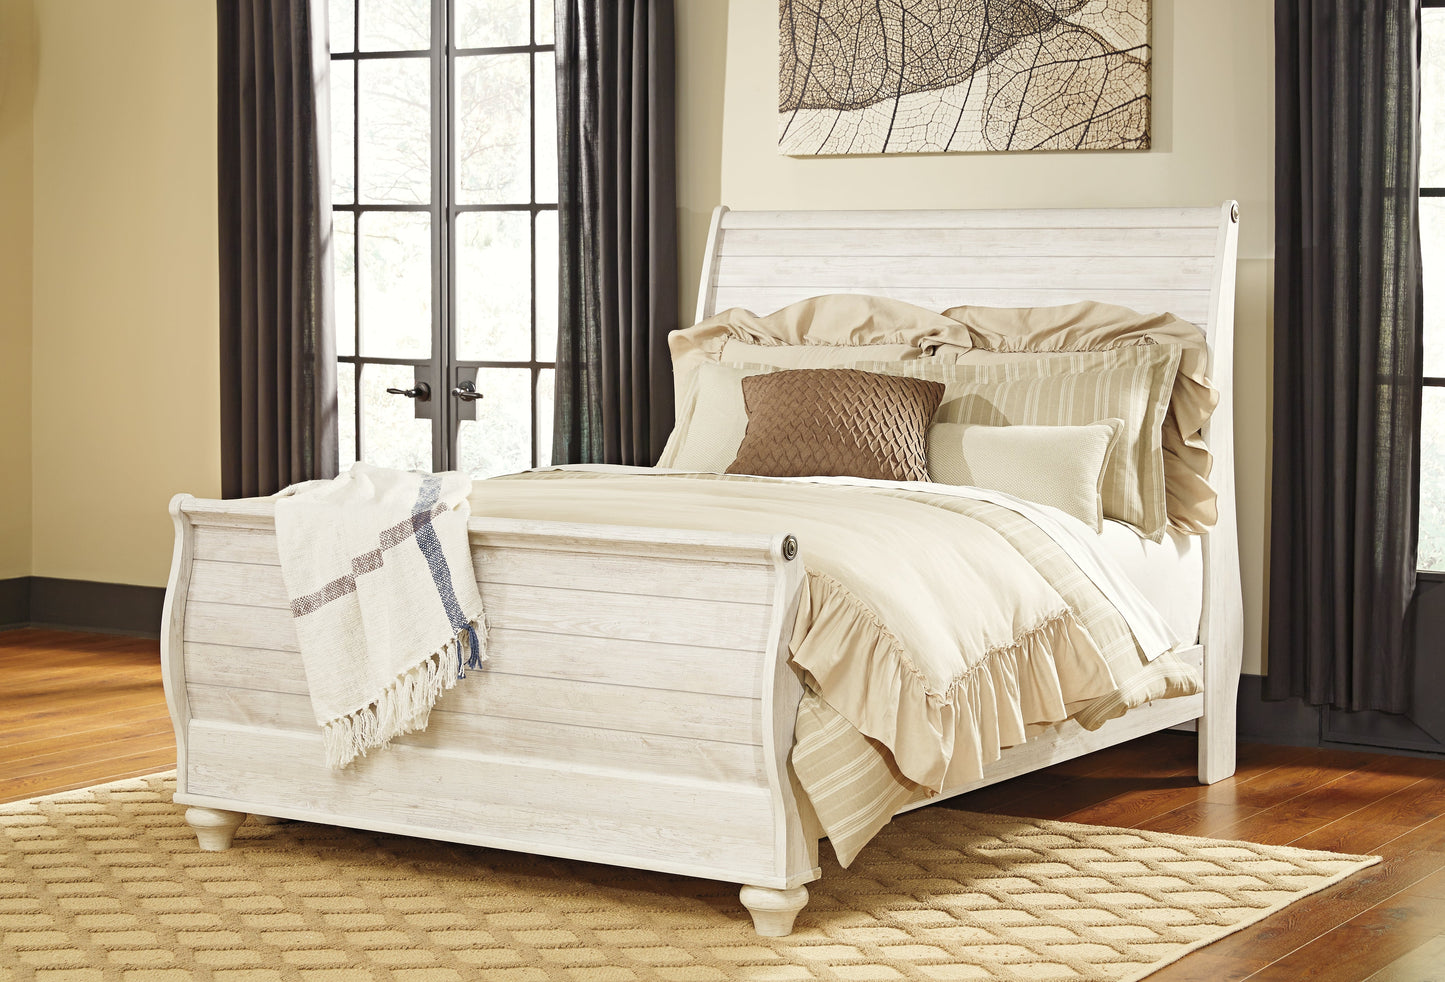 Willowton Whitewash Queen Sleigh Bedroom Set with 2 Dressers, Mirror, Chest and 2 Nightstands